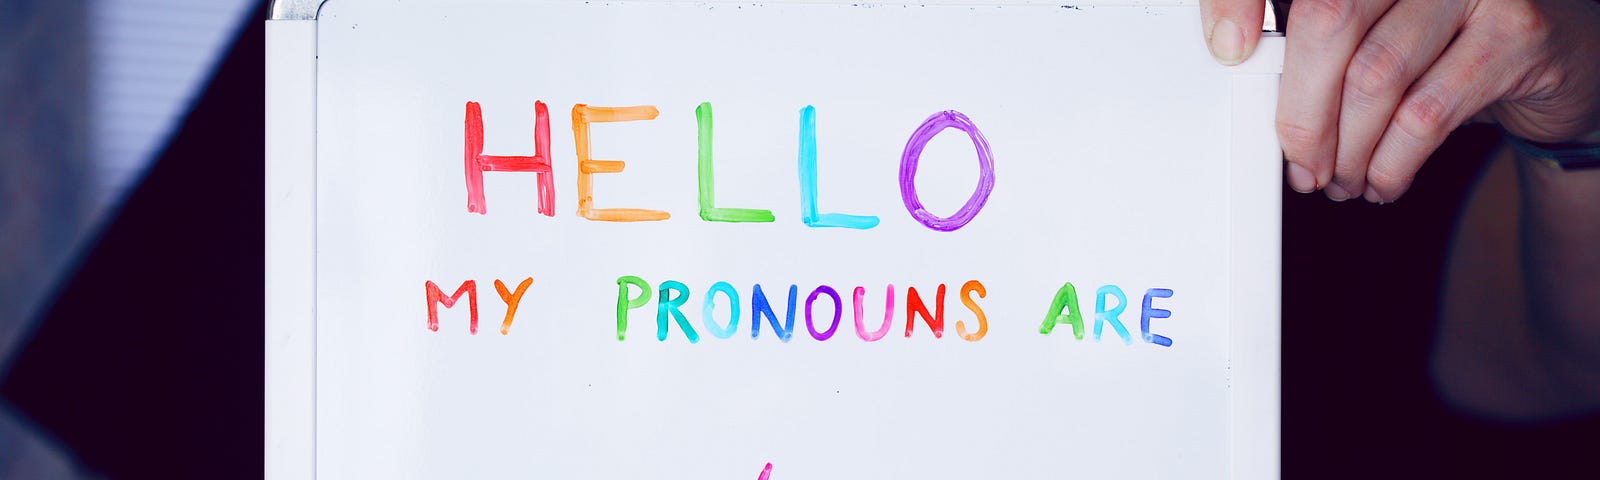 A person holding a sign written in rainbow colors that says “Hello my pronouns are ______/_______